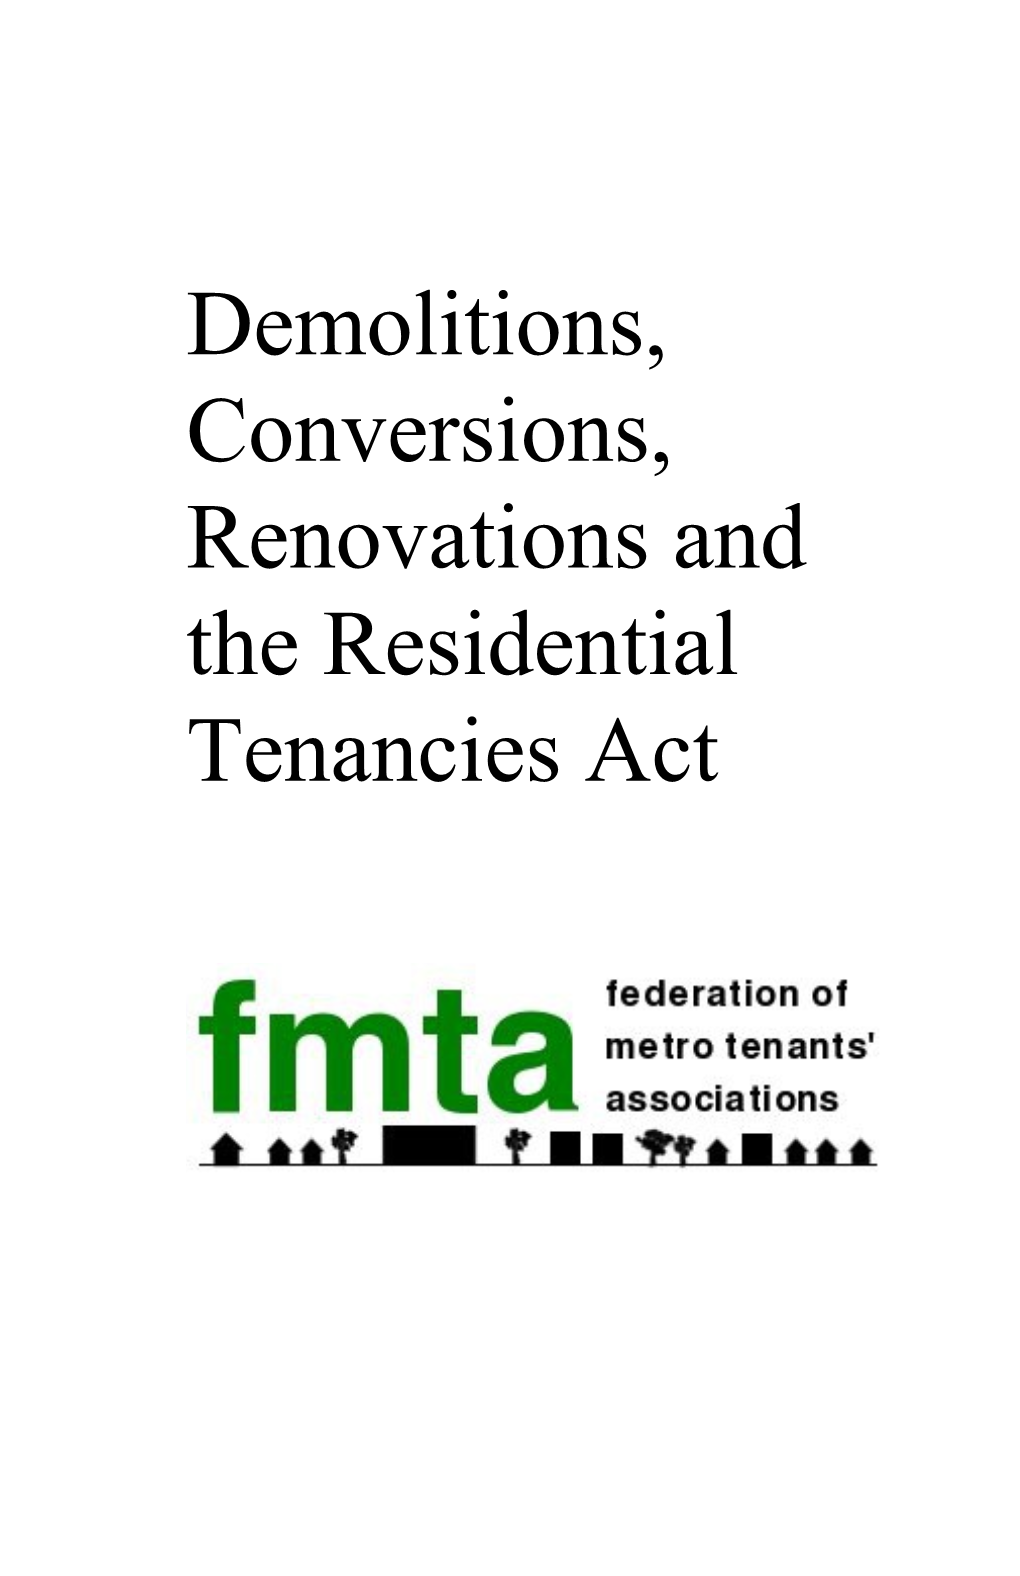 Demolitions, Conversions, Renovations and the Residential Tenancies Act